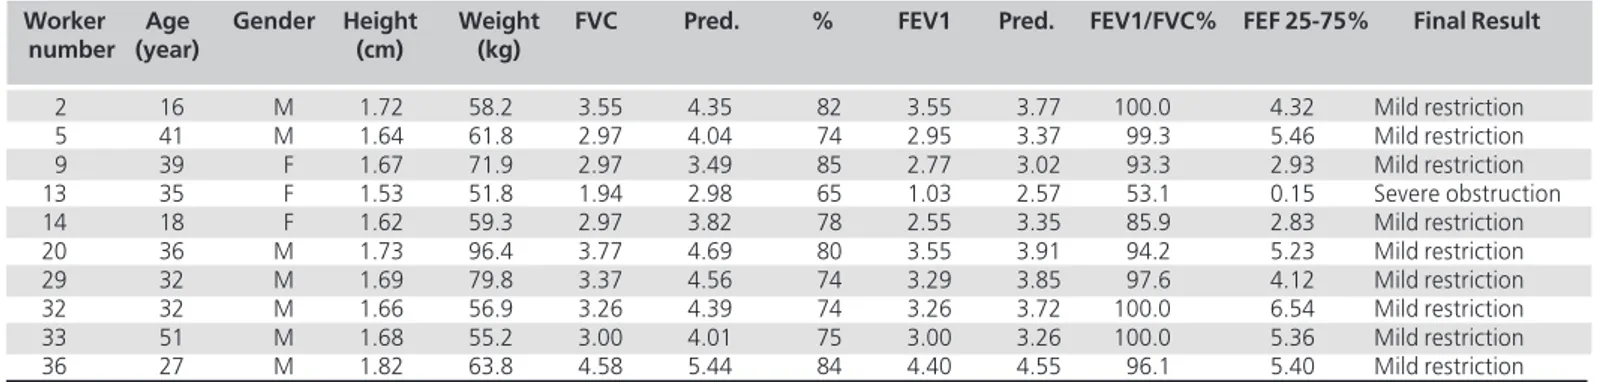 Table 1 - The printed data of workers with altered (restrictive/obstructive) lung function.